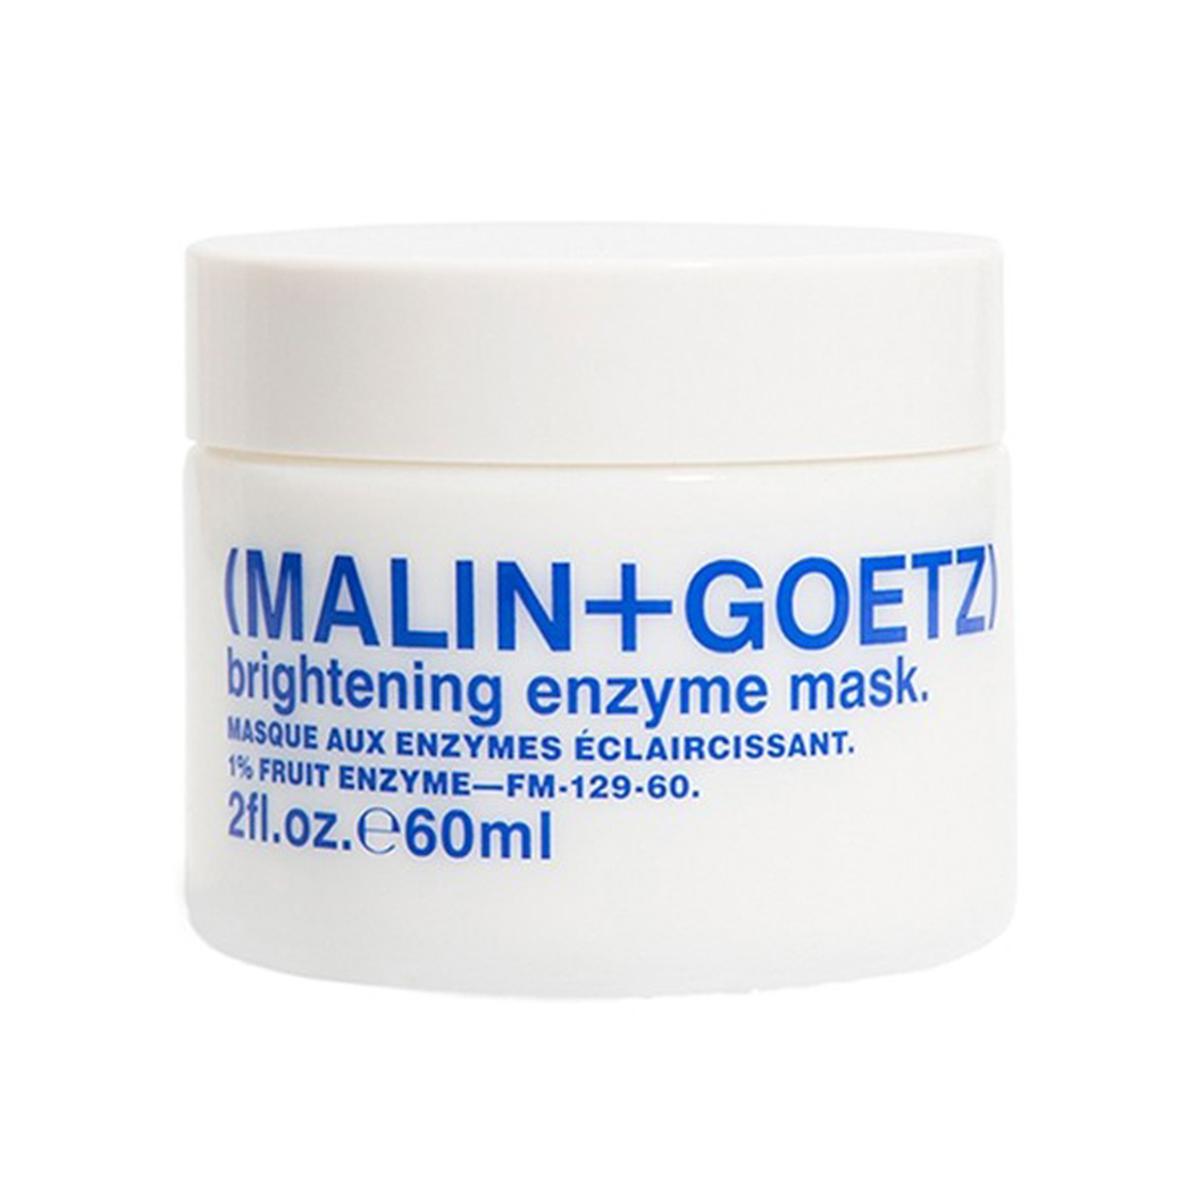 Primary image of Brightening Enzyme Mask